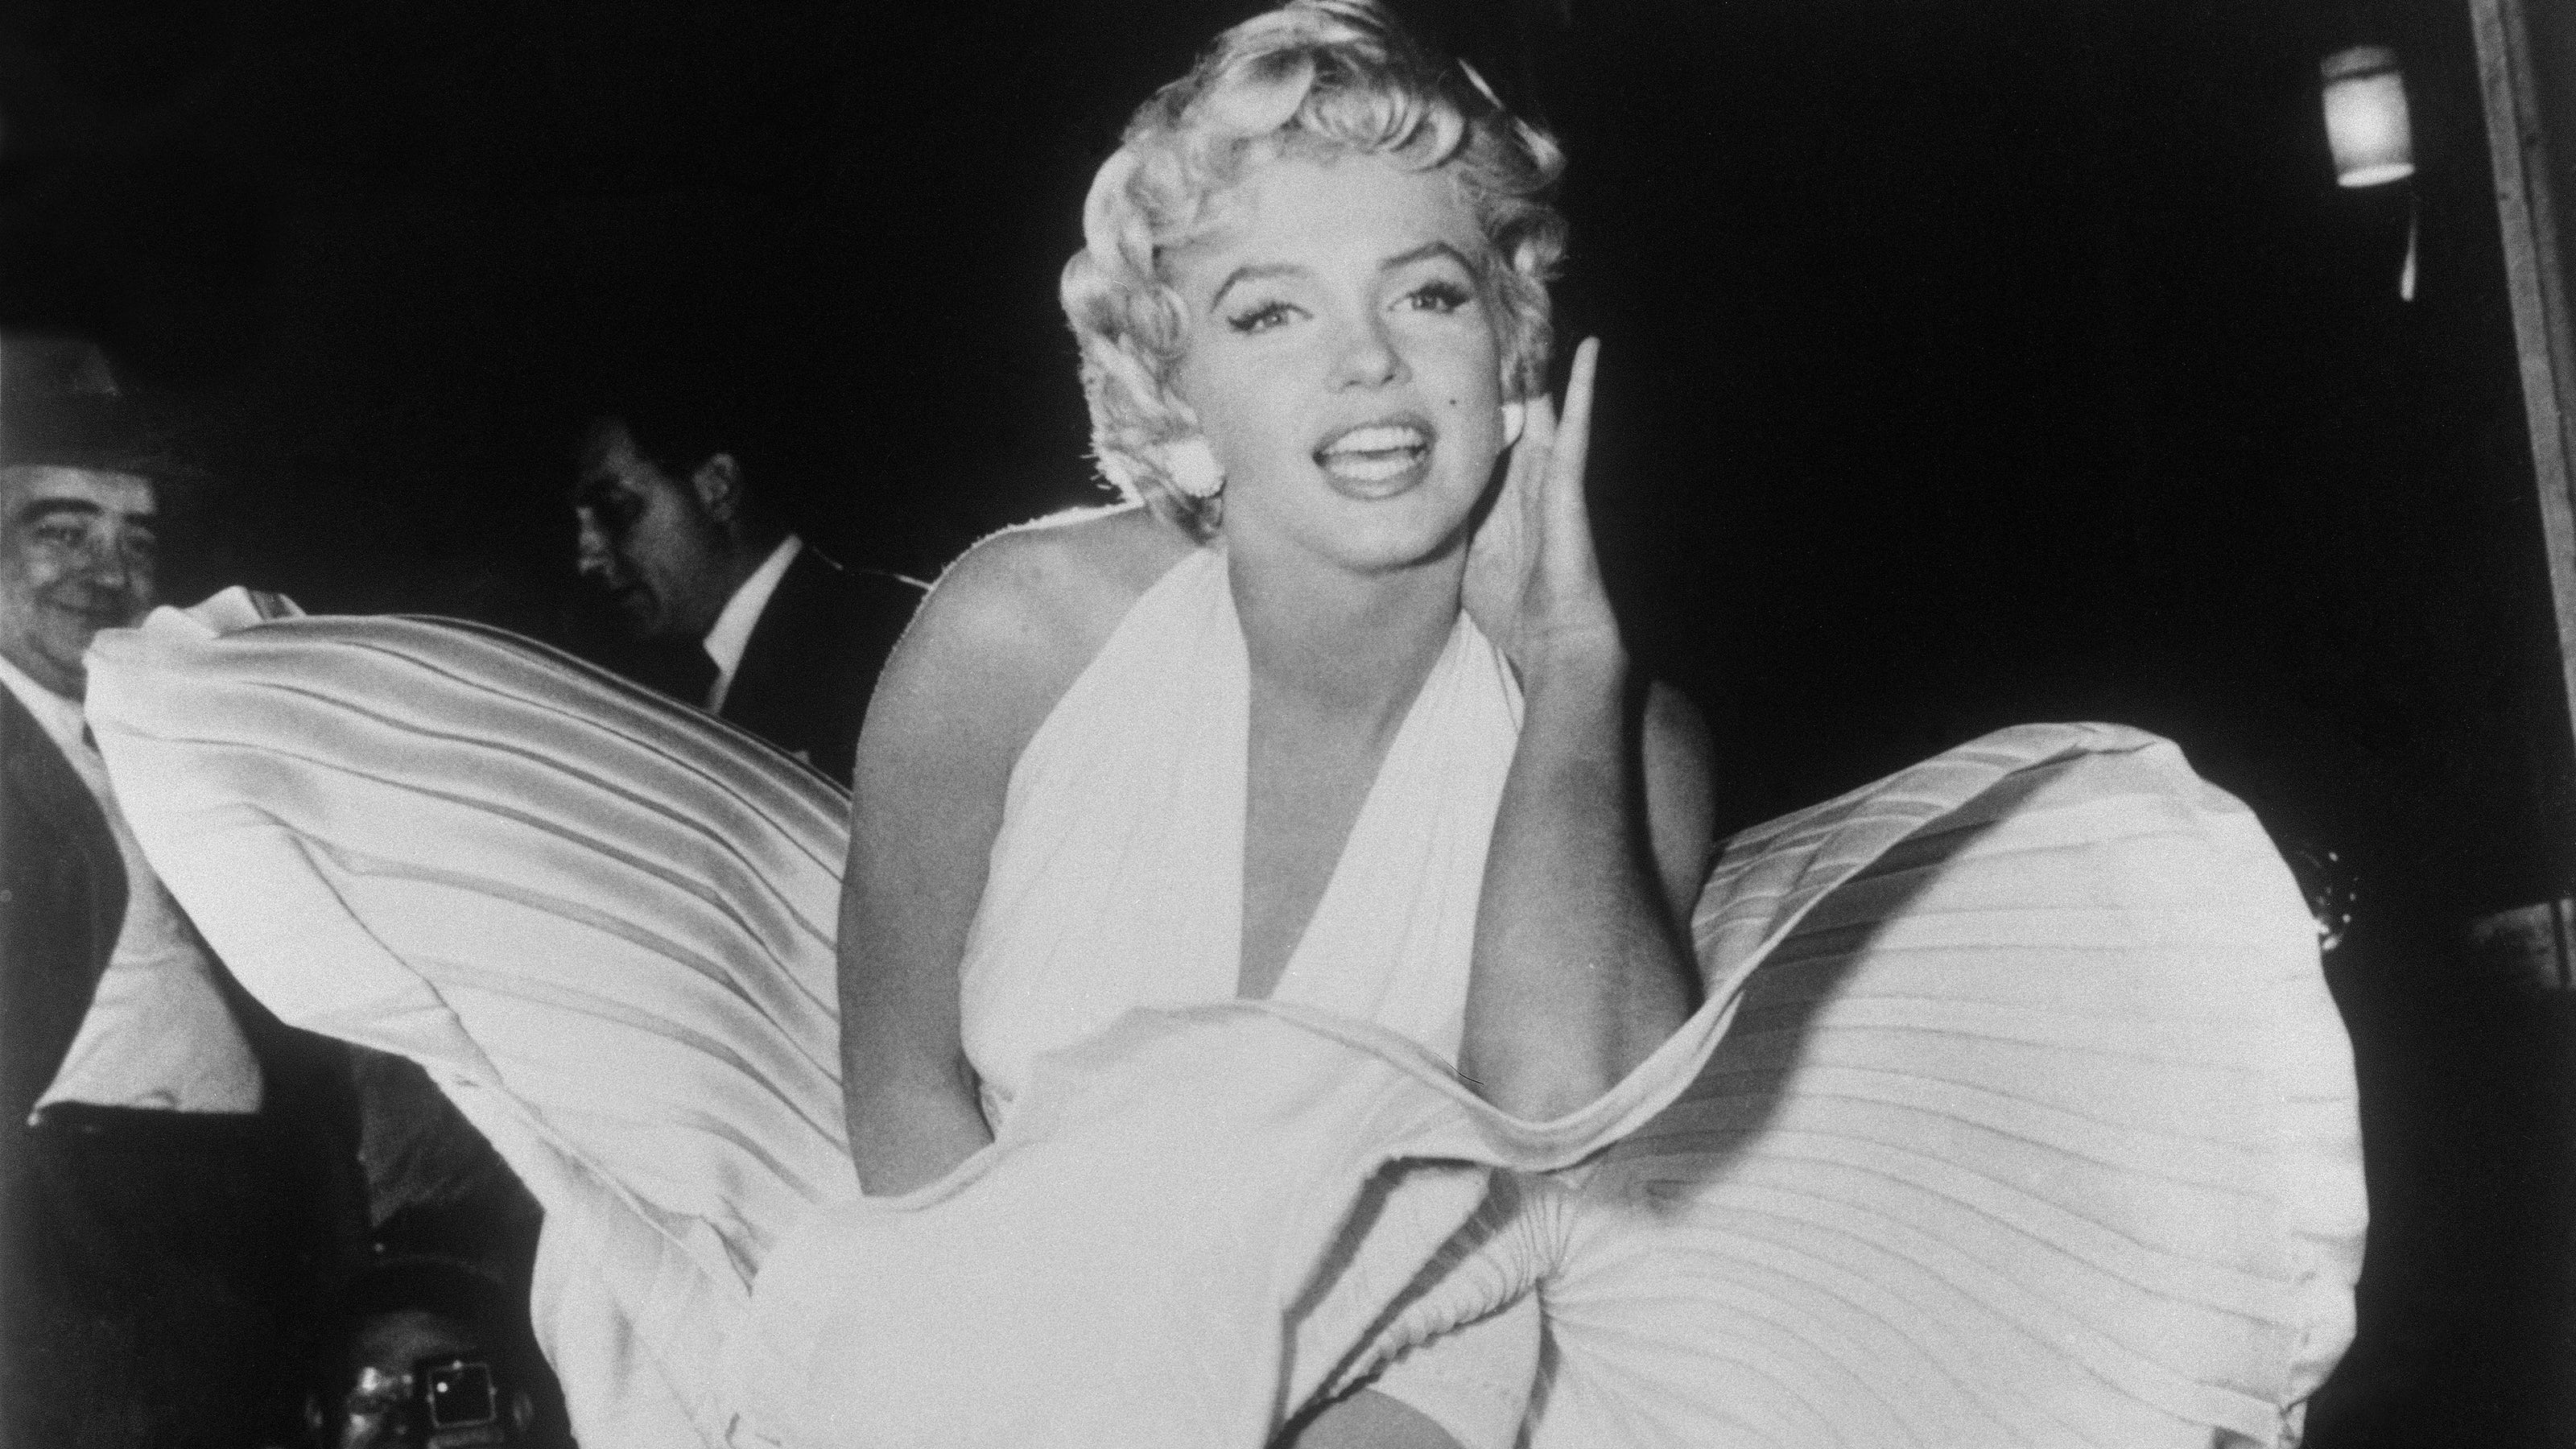 Marilyn Monroe auction featuring iconic white dress earns $1.6M